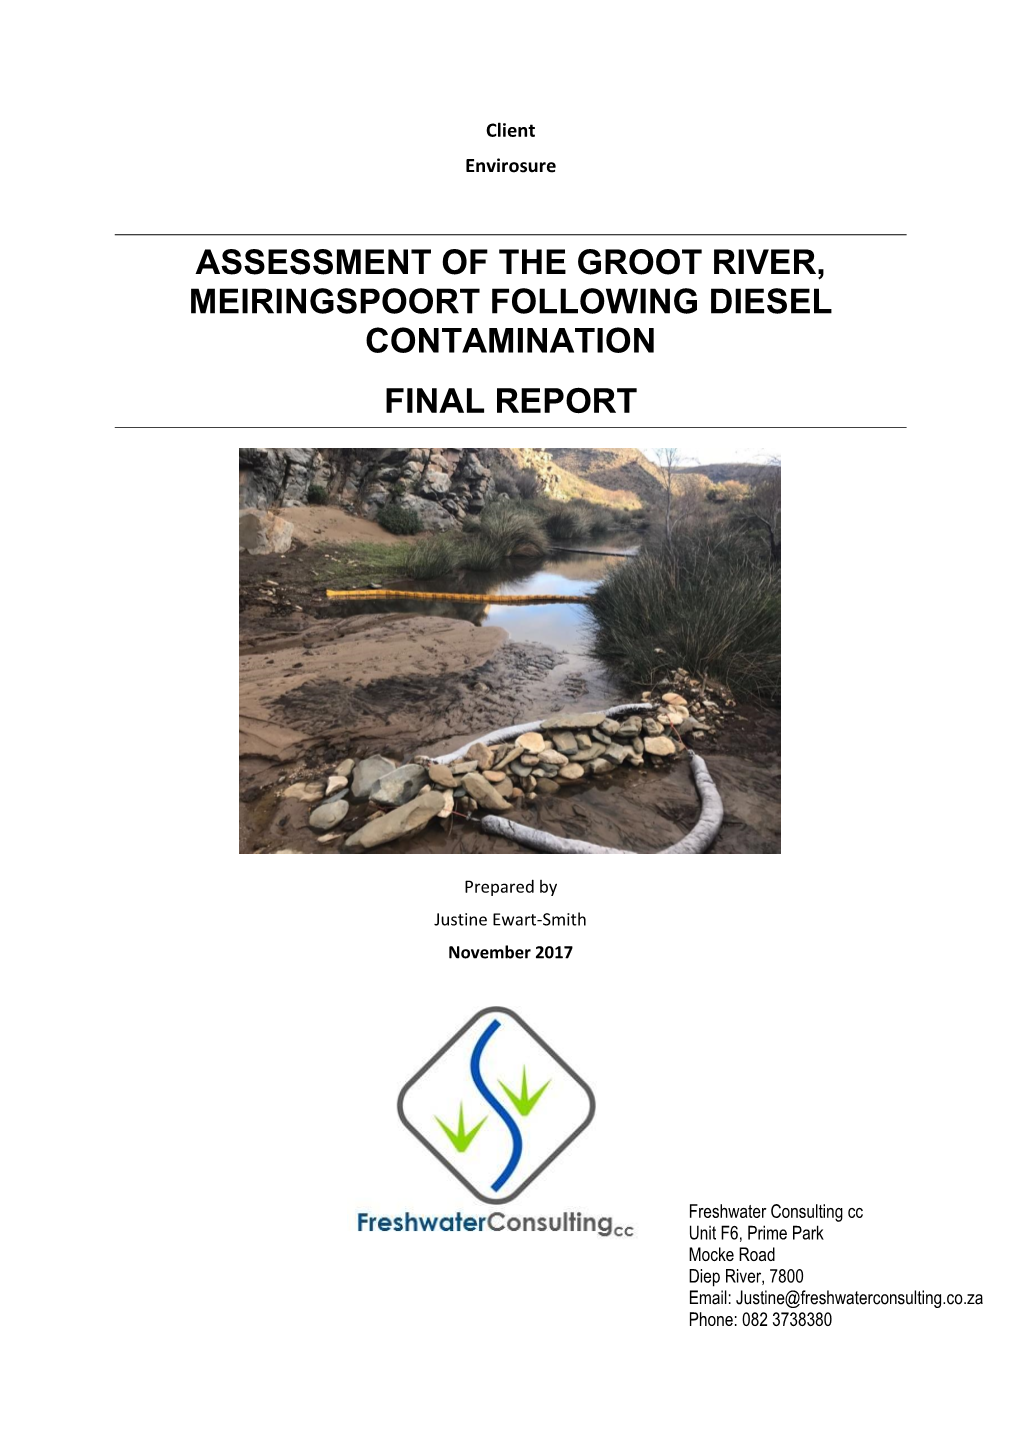 Assessment of the Groot River, Meiringspoort Following Diesel Contamination Final Report